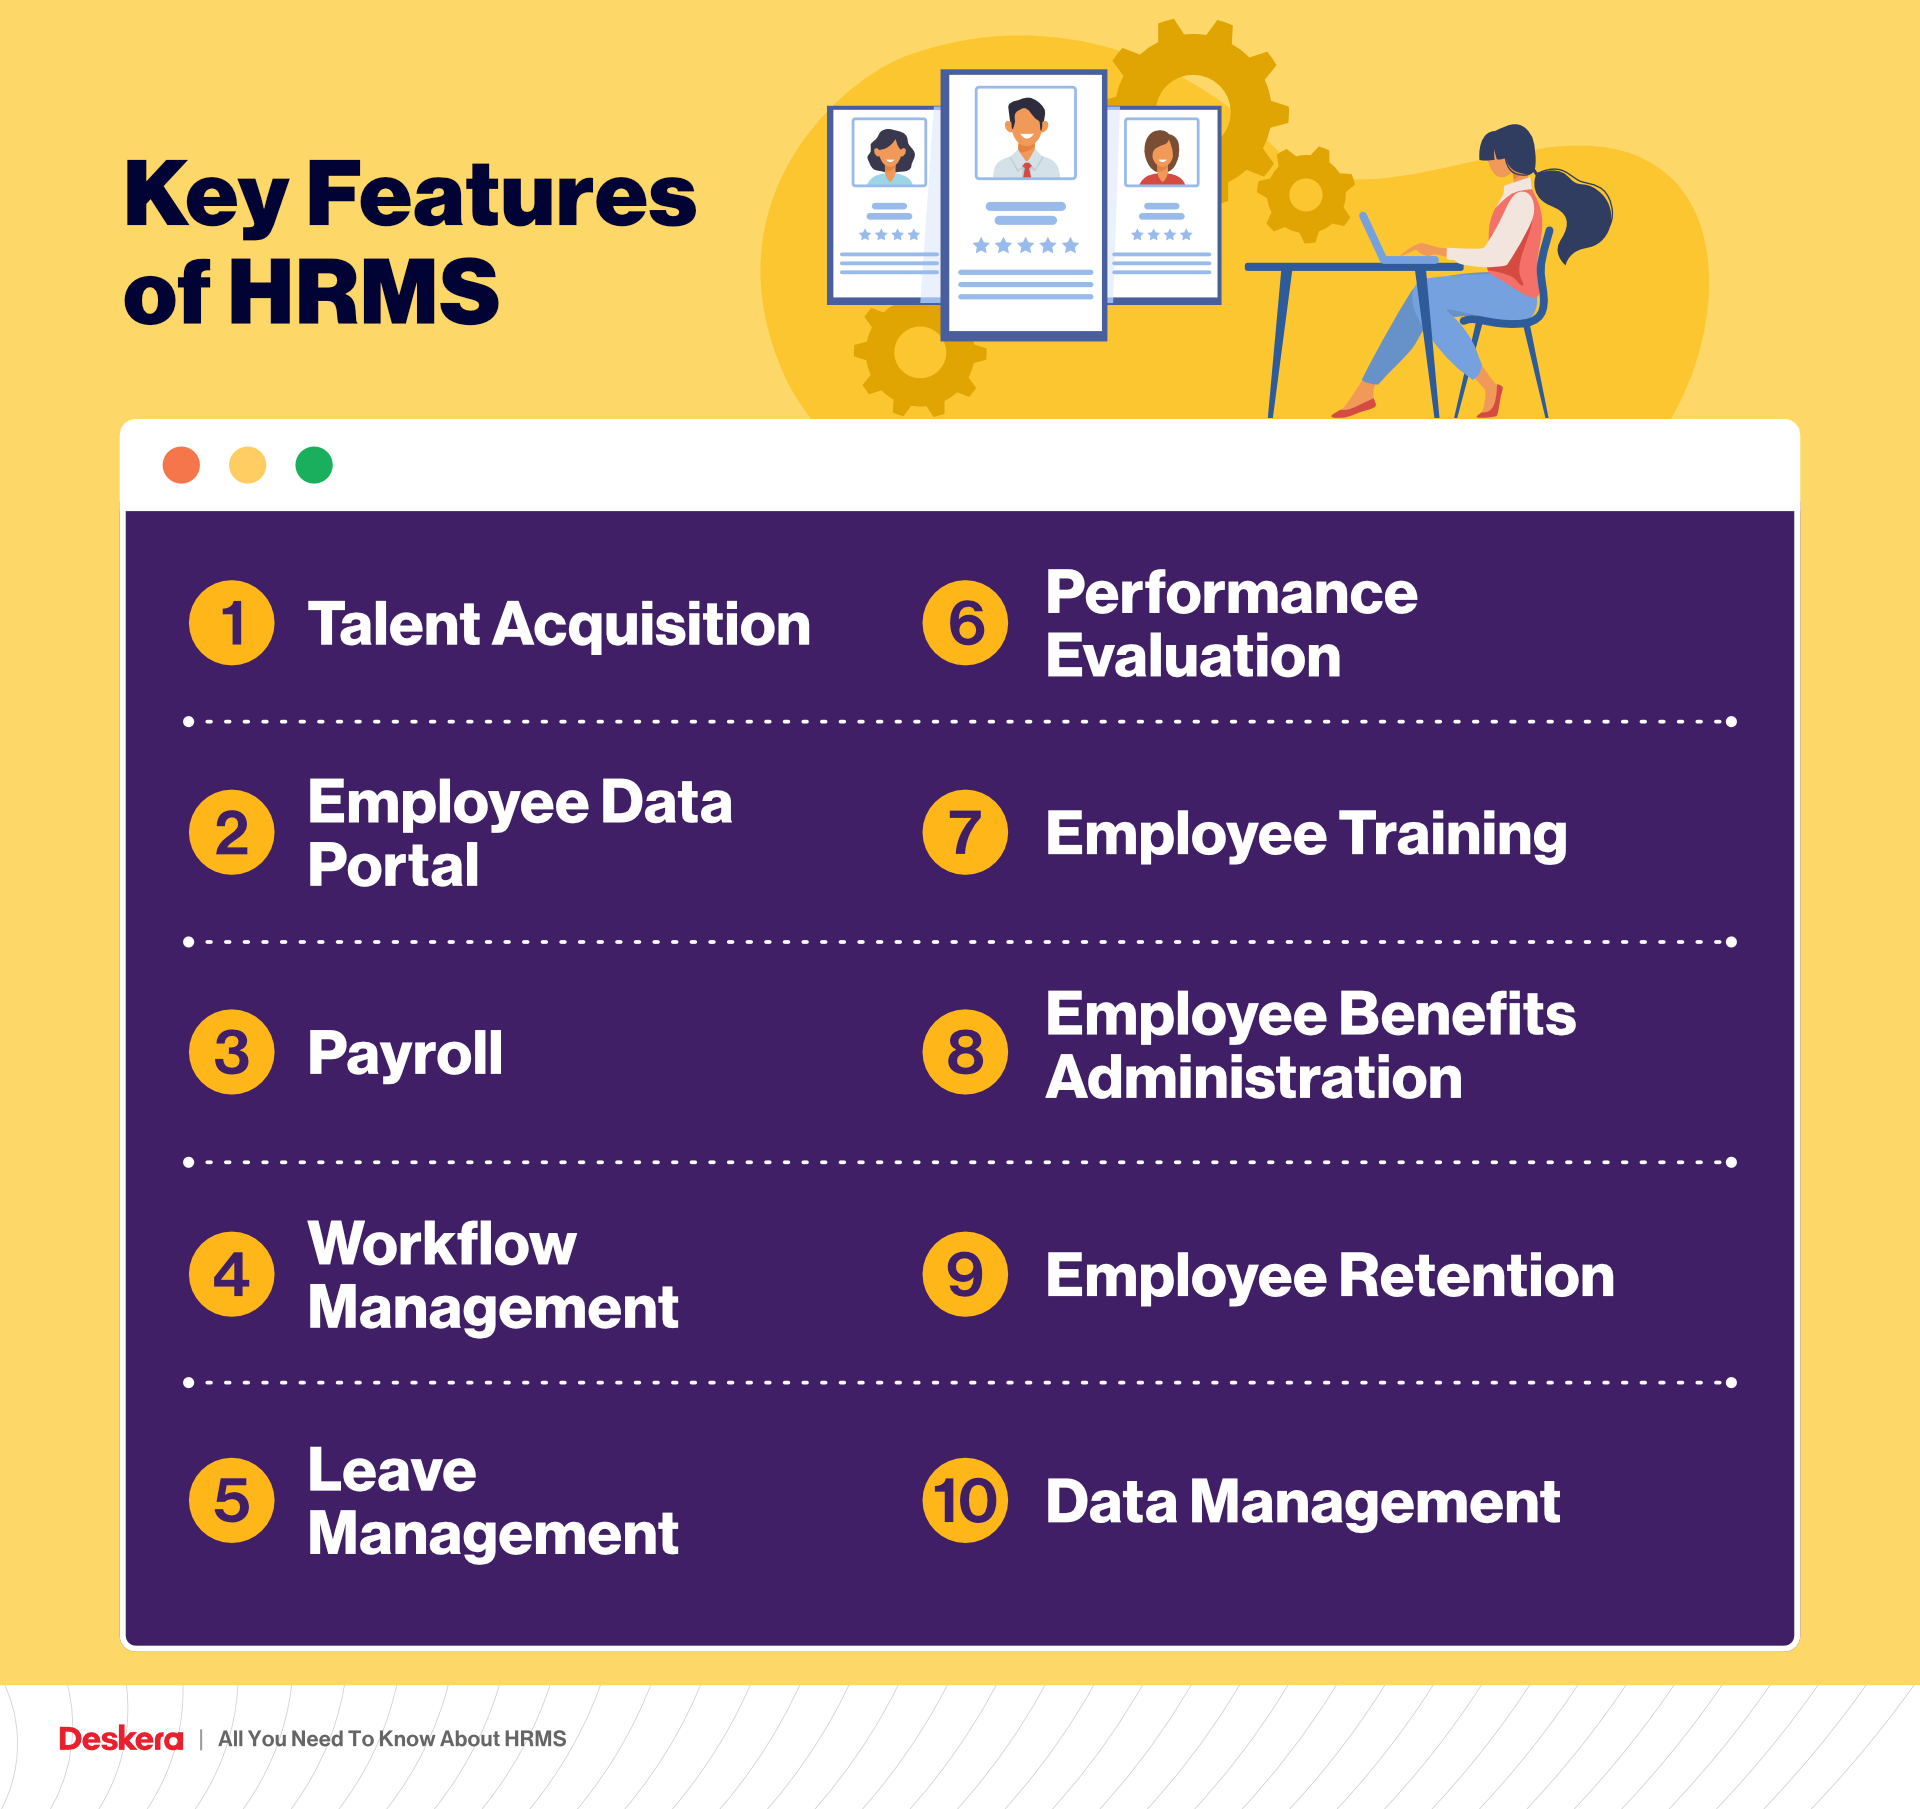 Key features of HRMS